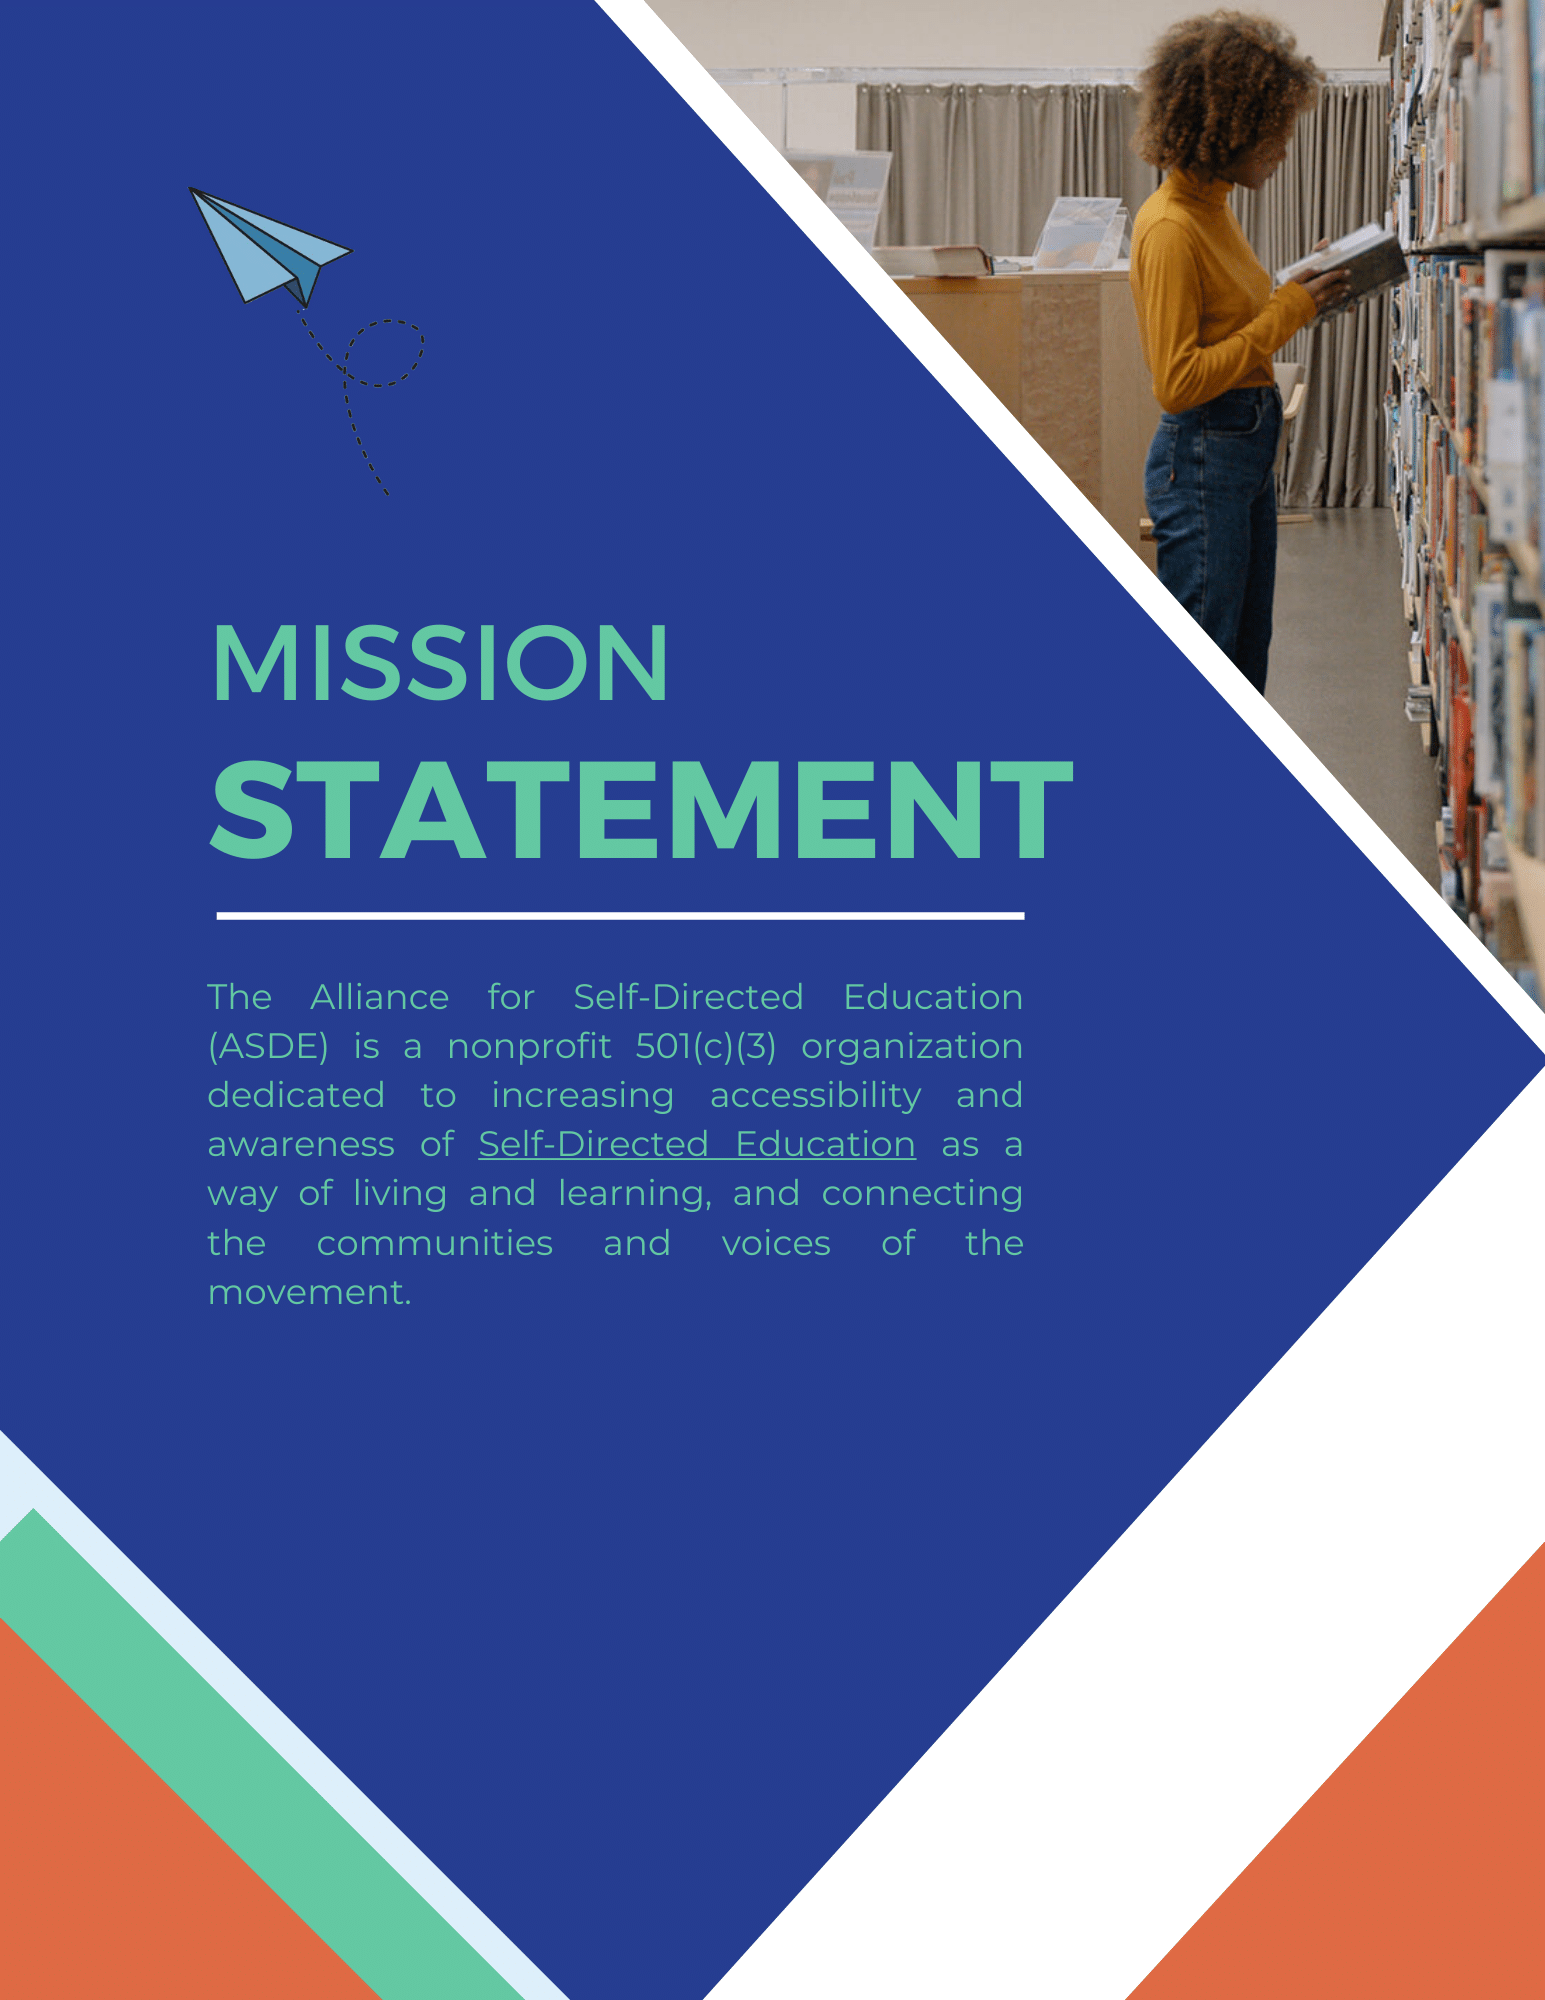 Mission Statement: The Alliance for Self-Directed Education (ASDE) is a nonprofit 501(c)(3) organization dedicated to increasing accessibility and awareness of Self-Directed Education as a way of living and learning, and connecting the communities and voices of the movement.